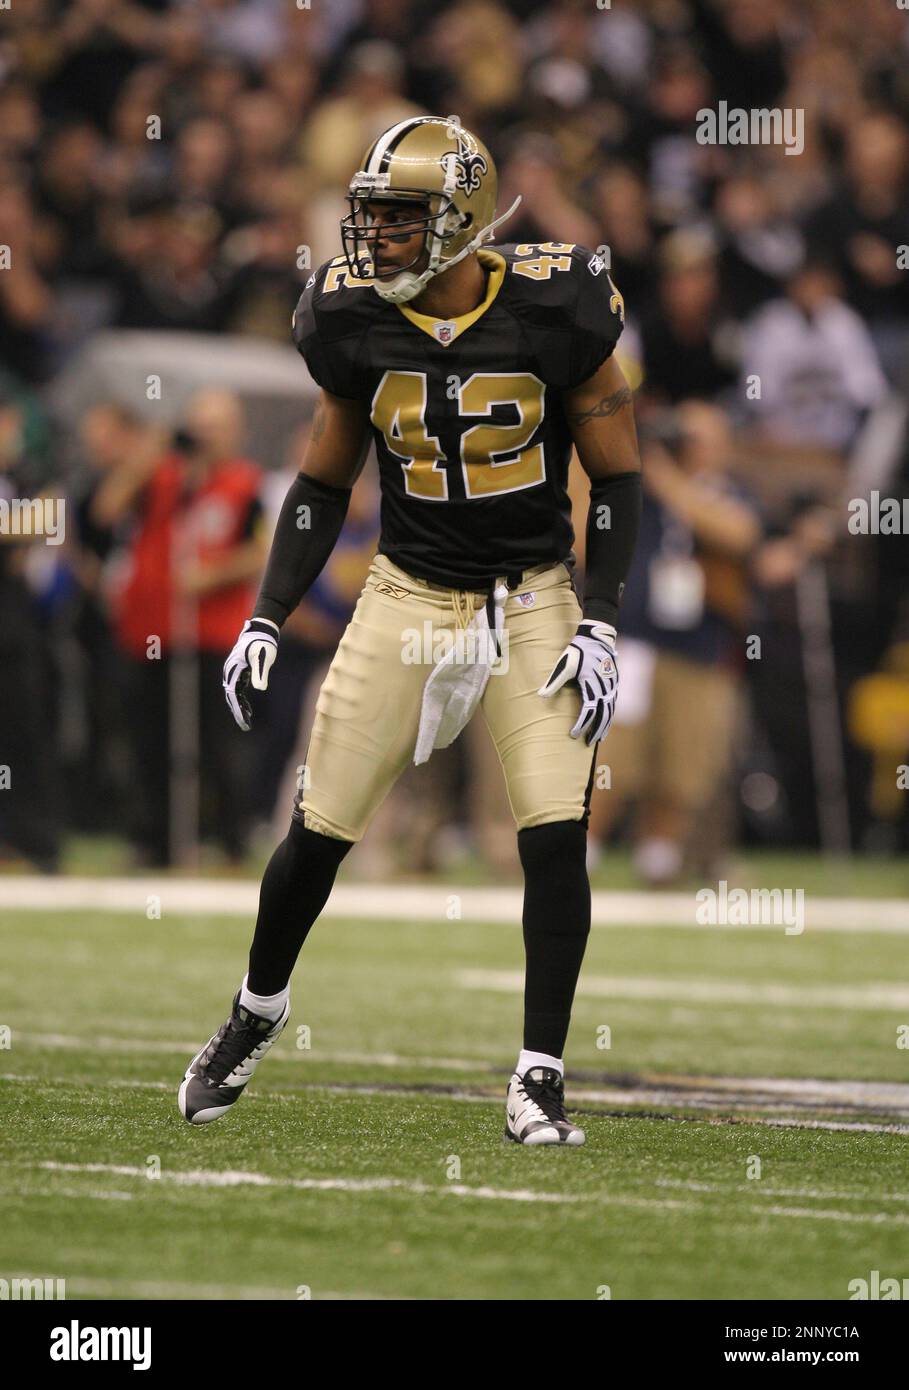 16 January 2010: New Orleans Saints safety Darren Sharper (42) in pass  coverage during a 45-14 win by the New Orleans Saints over the Arizona  Cardinals in a 2010 NFC Divisional Playoff